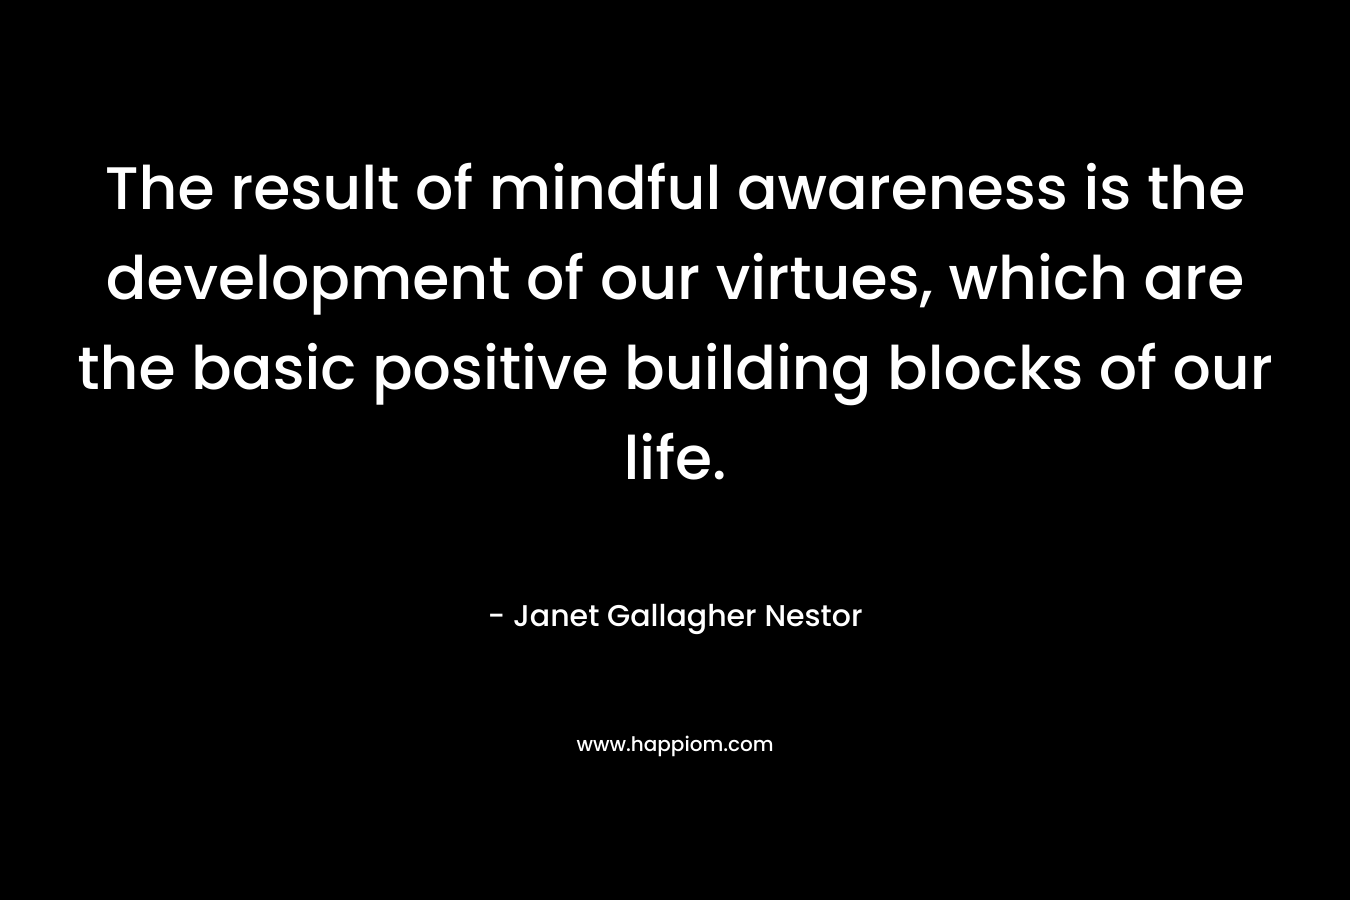 The result of mindful awareness is the development of our virtues, which are the basic positive building blocks of our life.